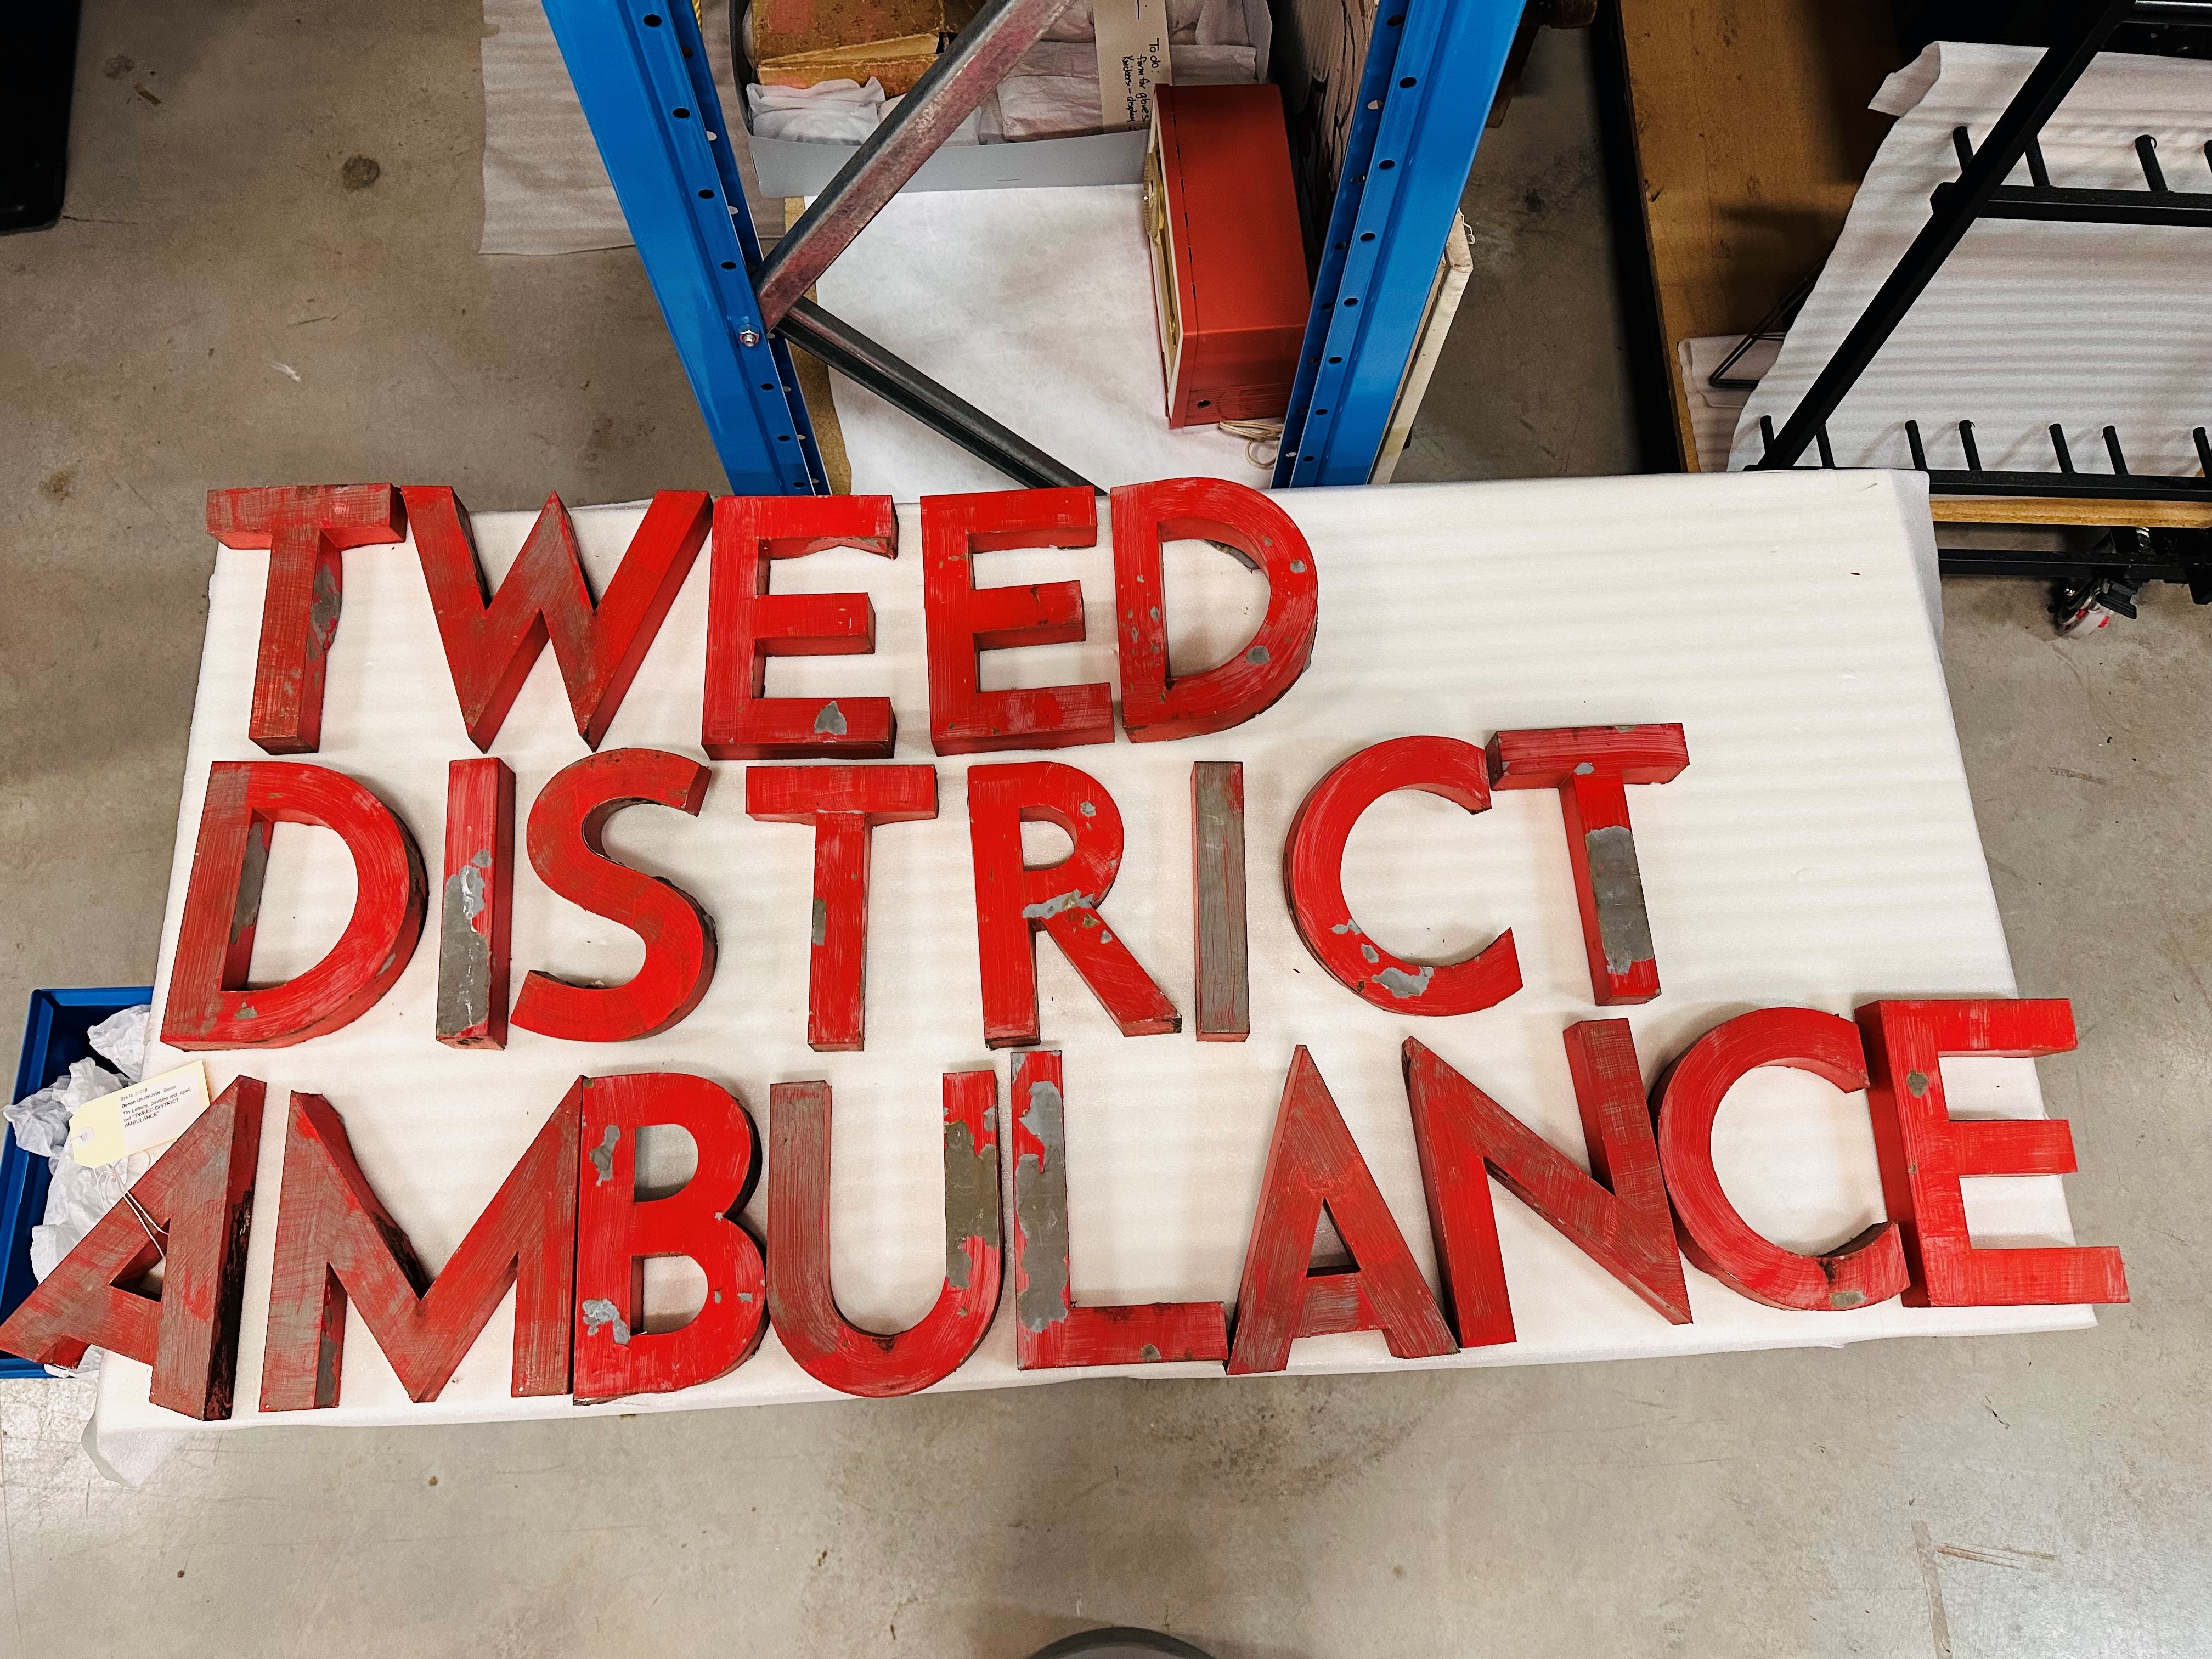 and the answer is "Tweed District Ambulance" did you guess it?